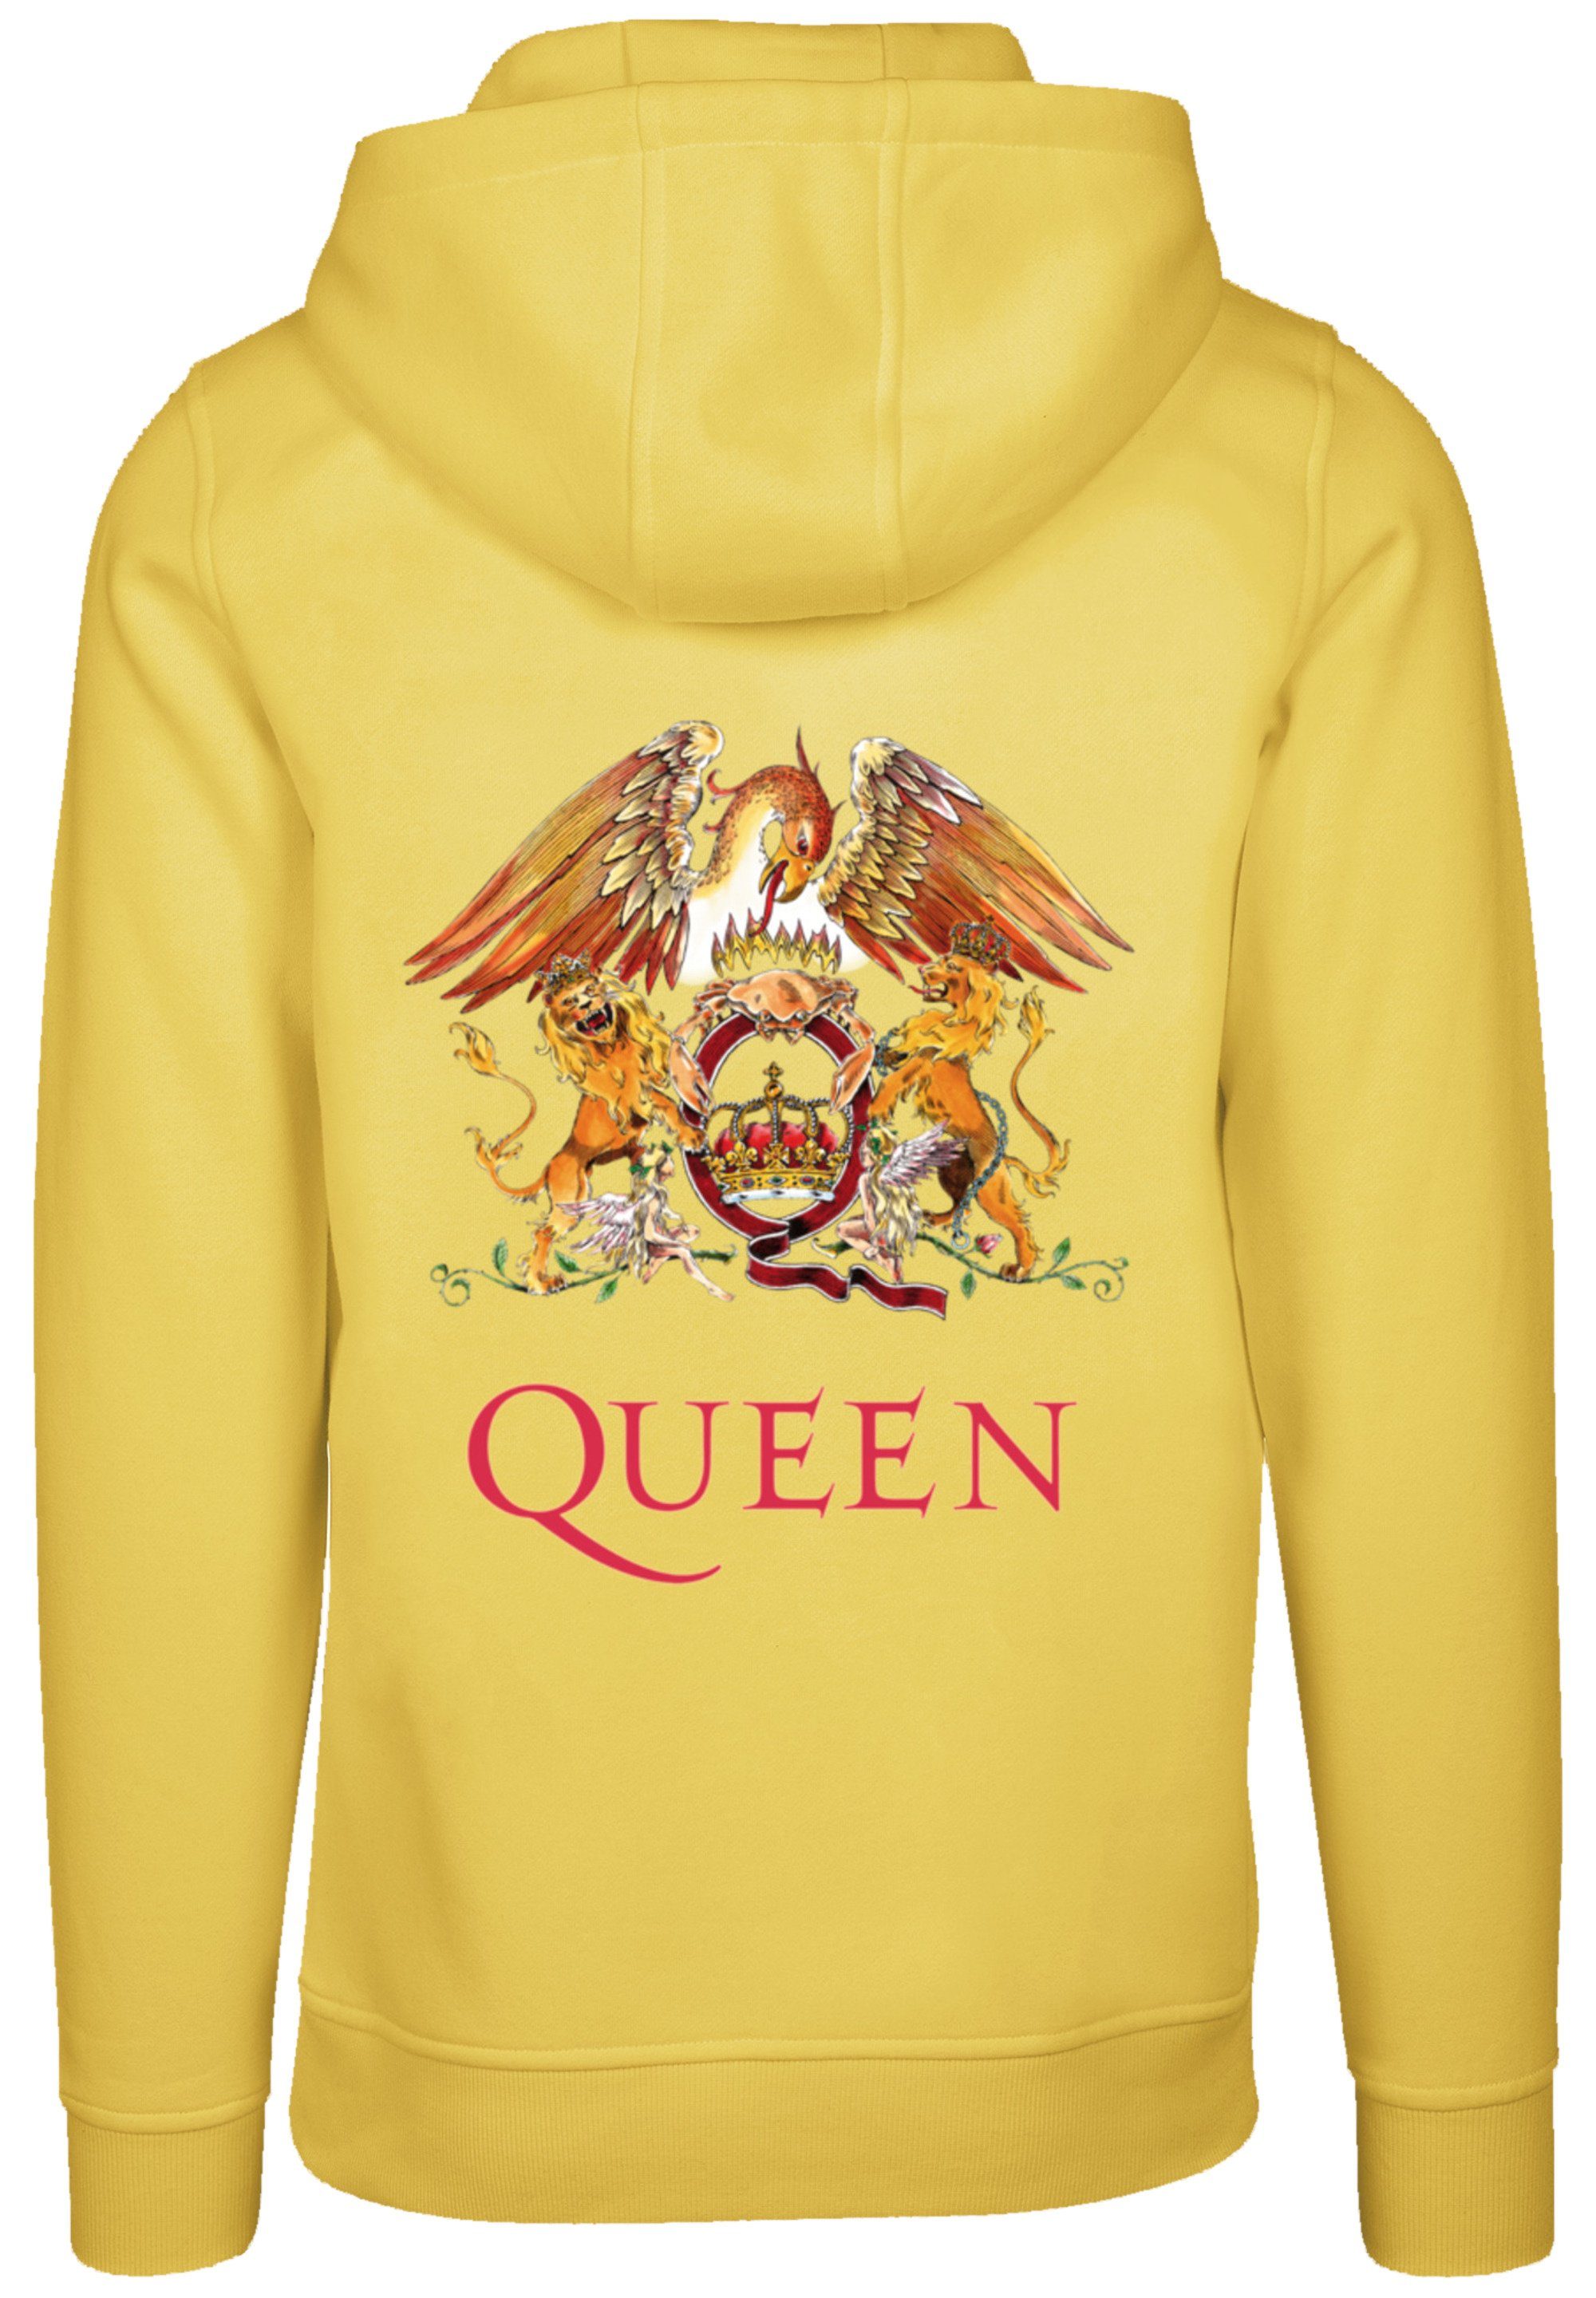 F4NT4STIC Kapuzenpullover Queen Classic Logo Rock Musik Band Hoodie, Warm, Bequem taxi yellow